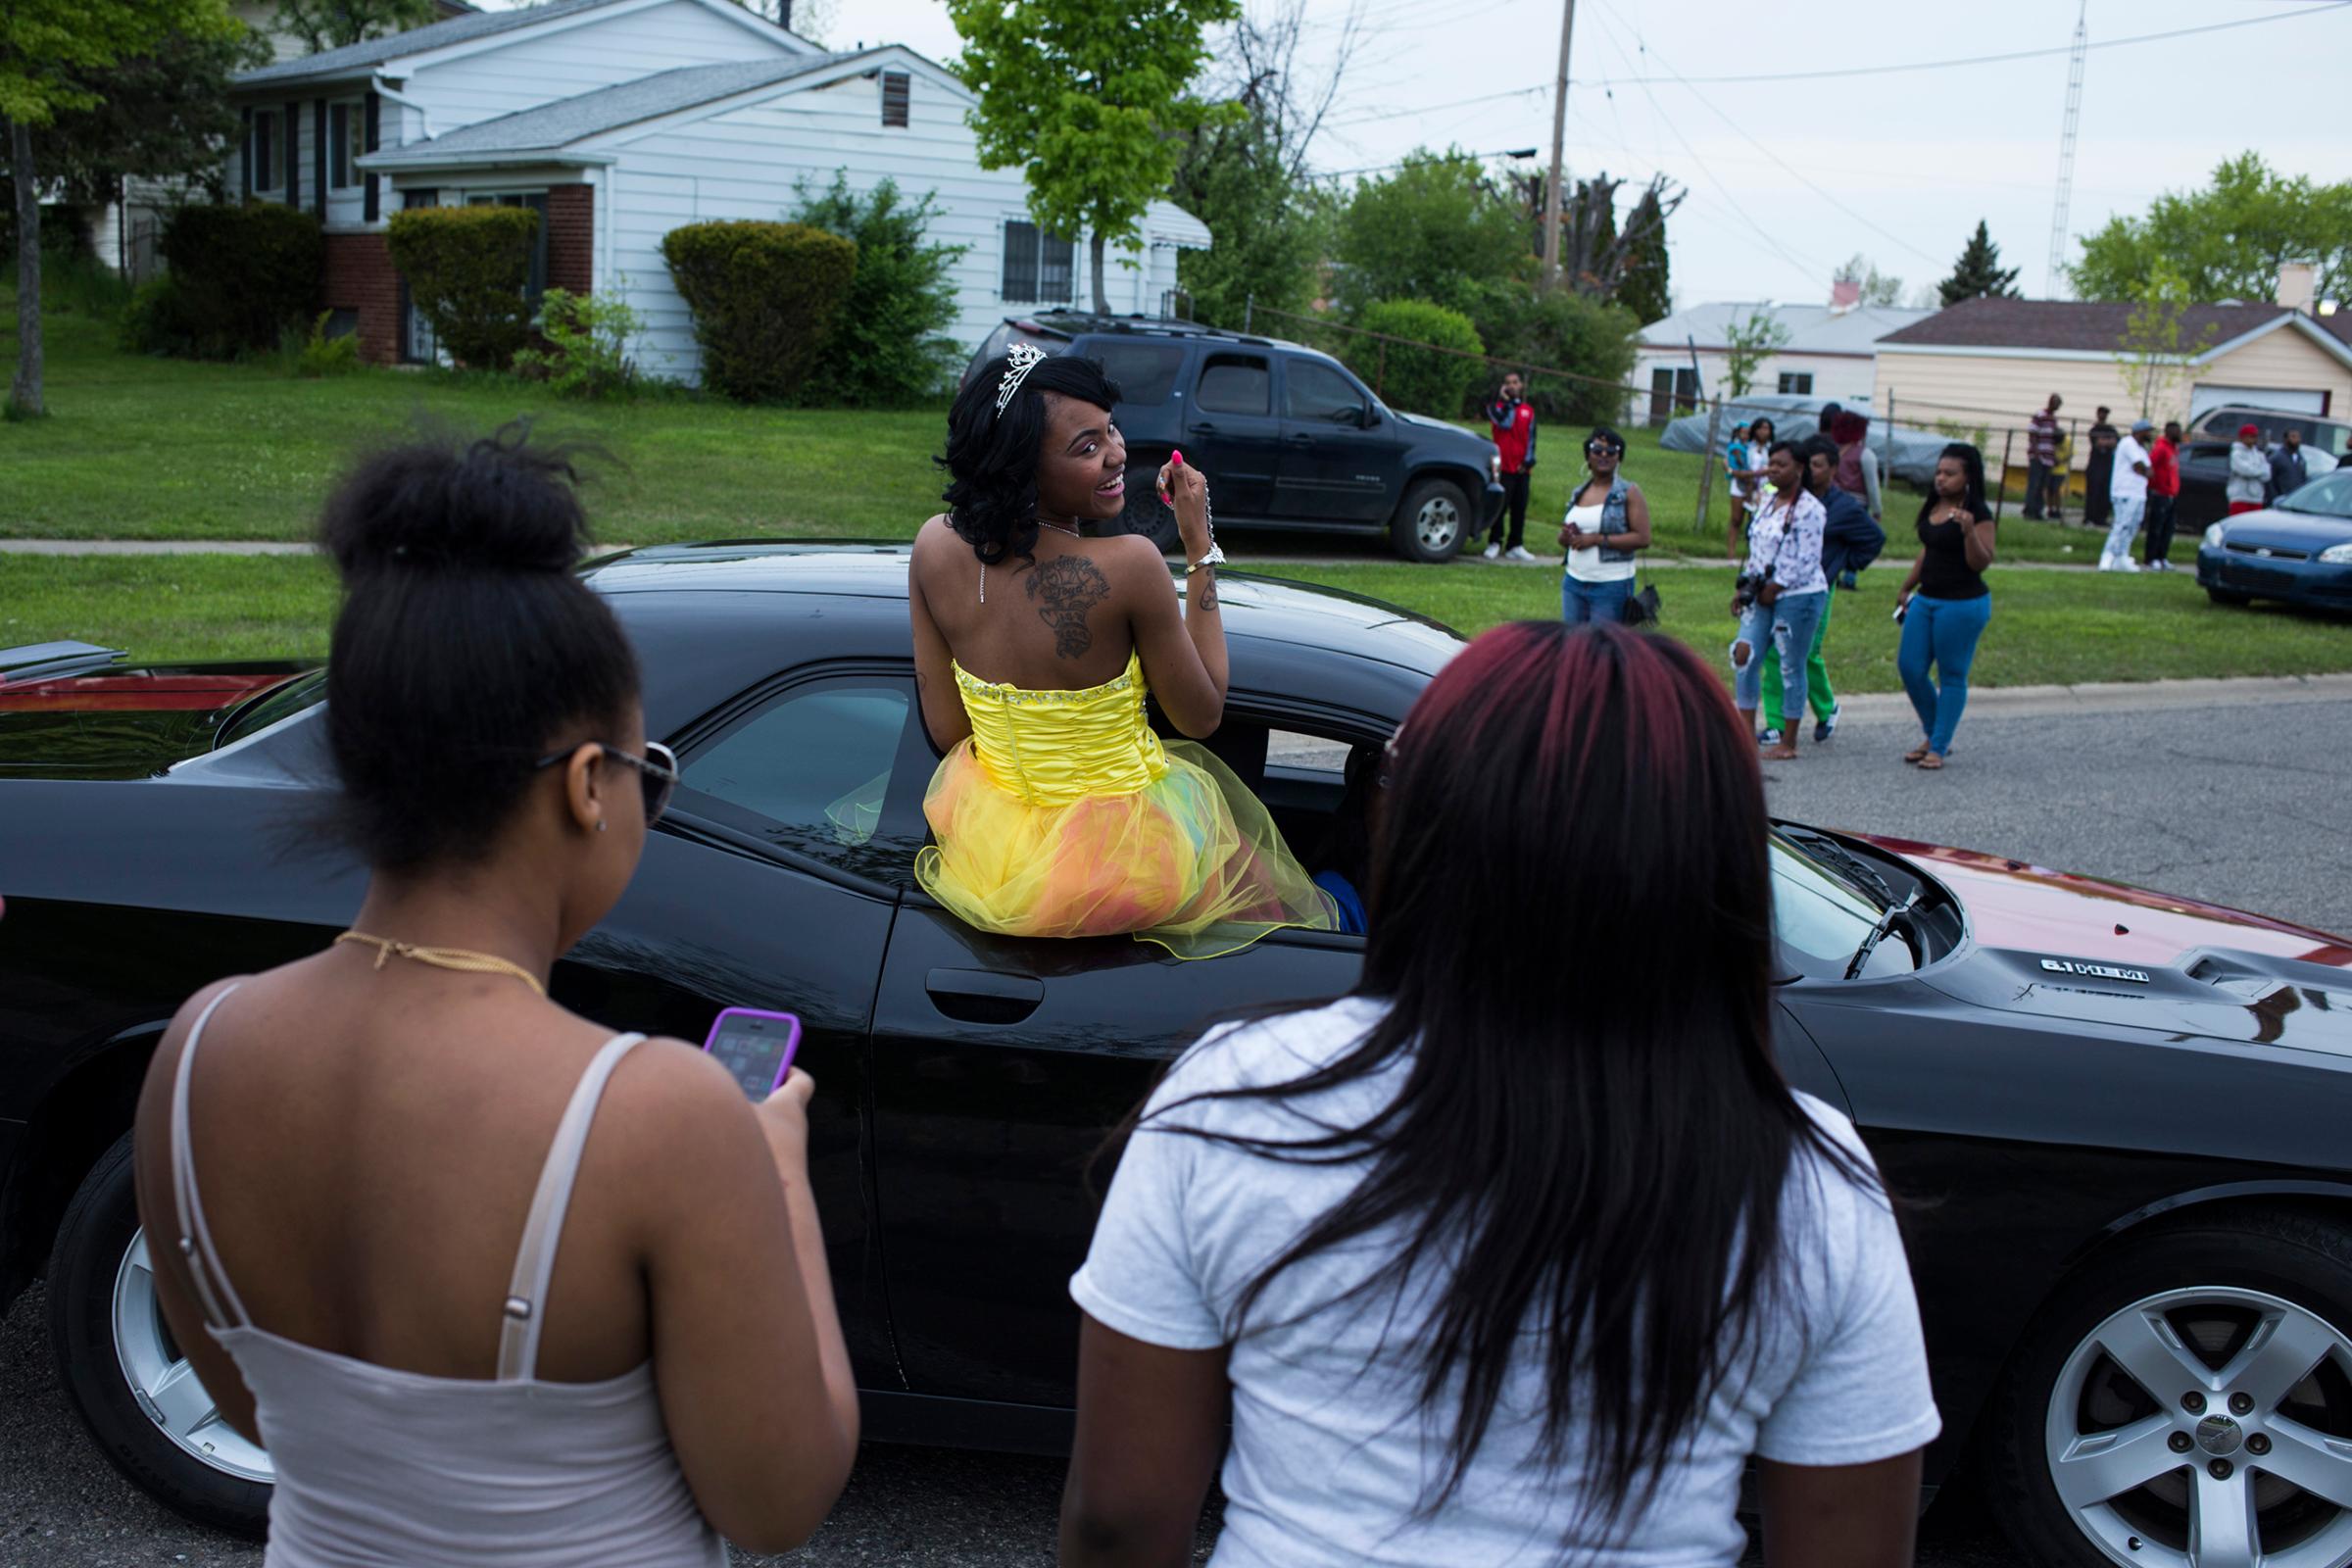 Beecher High School student Chatara Cornelius, 18, of Flint, Mich., dances from the window of a car as she makes her entry during a pre-prom red carpet-style event at Dailey Elementary School in Mount Morris, May 20, 2016.